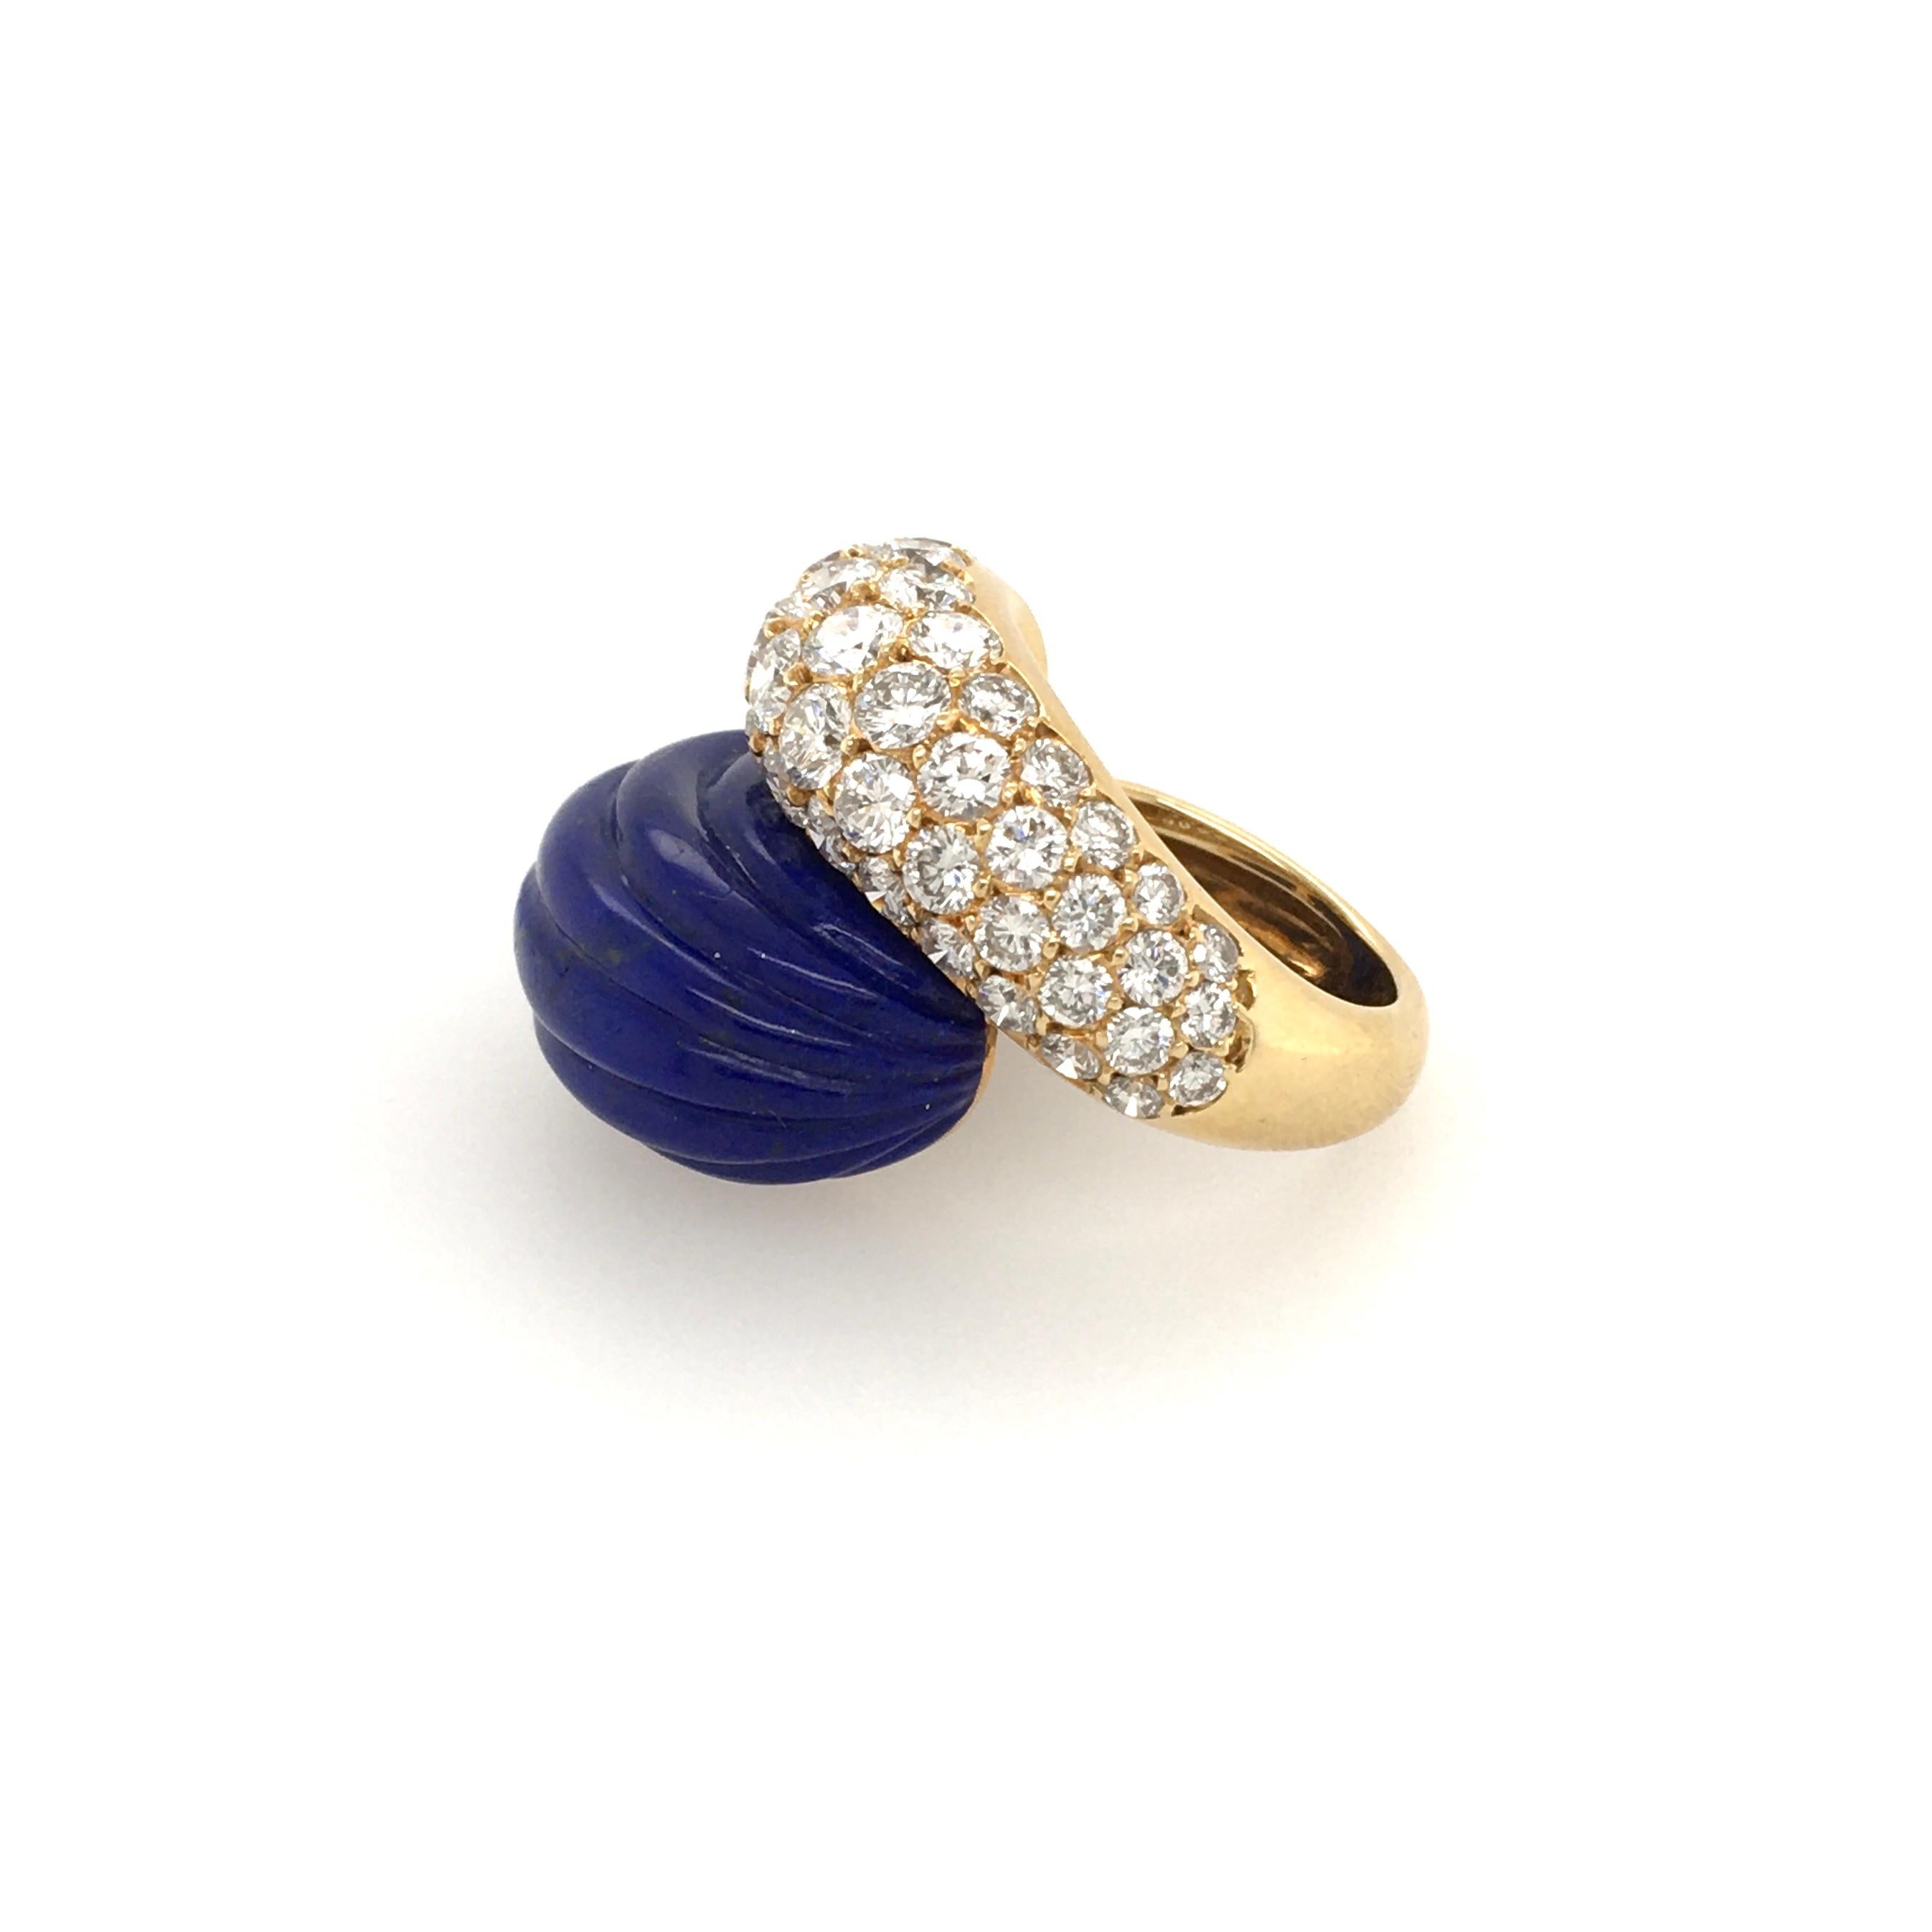 An 18 karat yellow gold, fluted lapis lazuli and diamond ring.  French. Circa 1960. Of bypass design, set with a pave set diamond bombe drop shaped plaque and a carved lapis lazuli plaque. Forty four diamonds weigh approximately 3.50 carats. Size 5